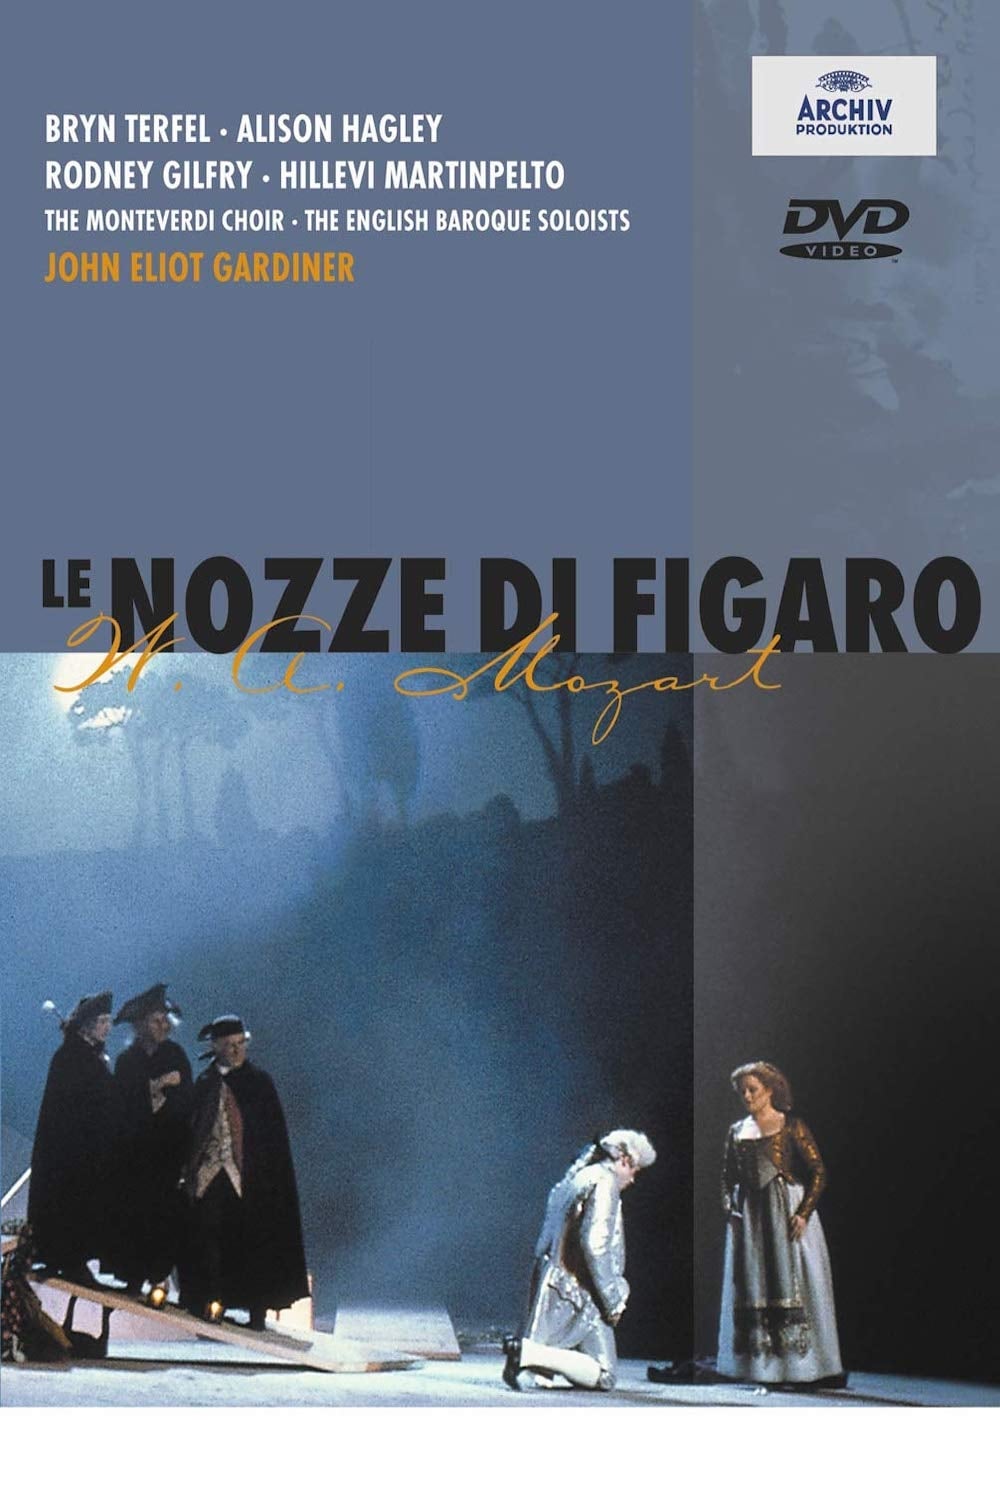 The Marriage of Figaro (1993)